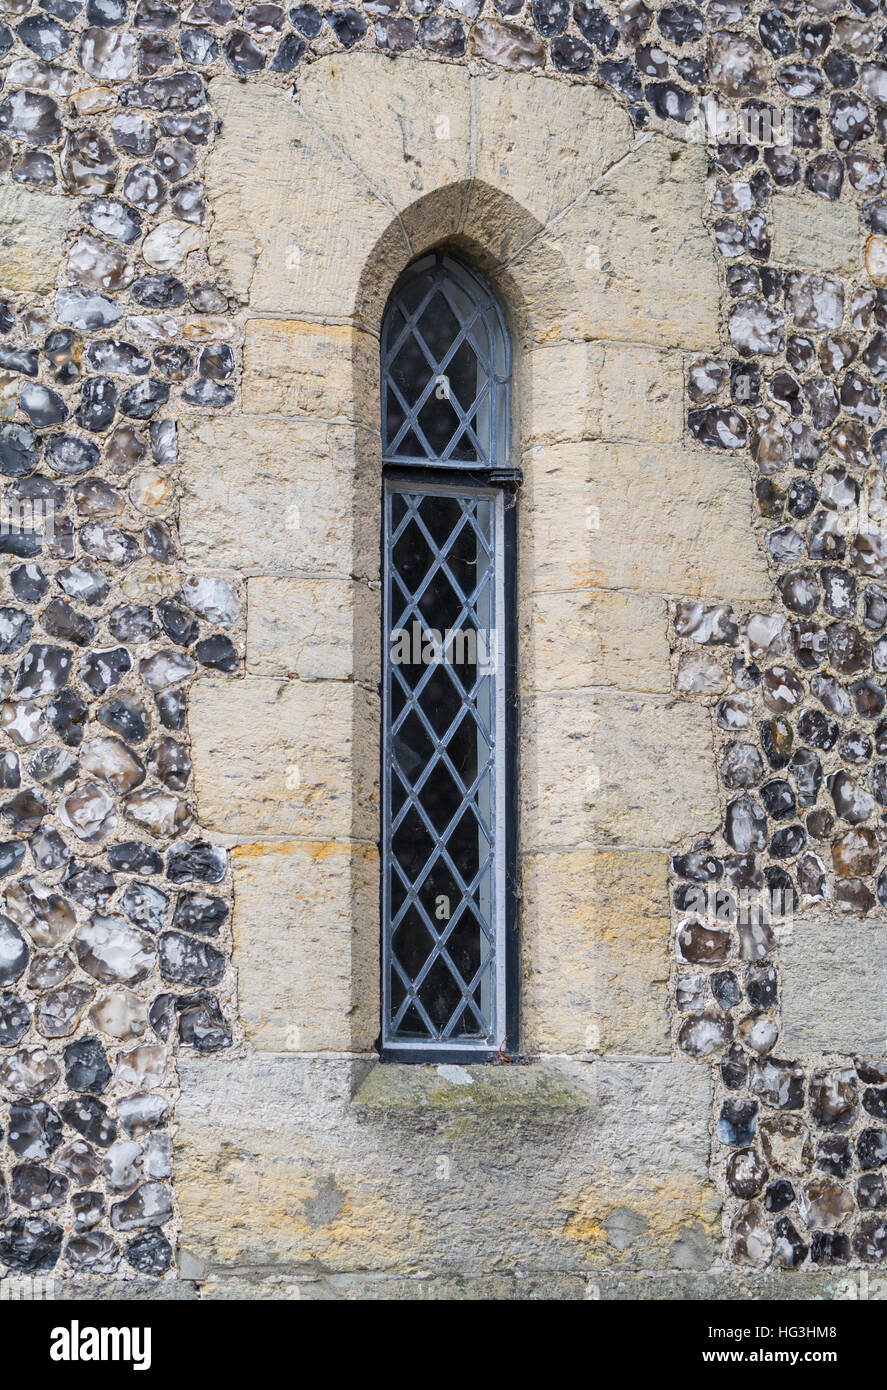 Arrow Loop window with modern glazing in an old Medieval castle in the UK. Arrow slit. Stock Photo